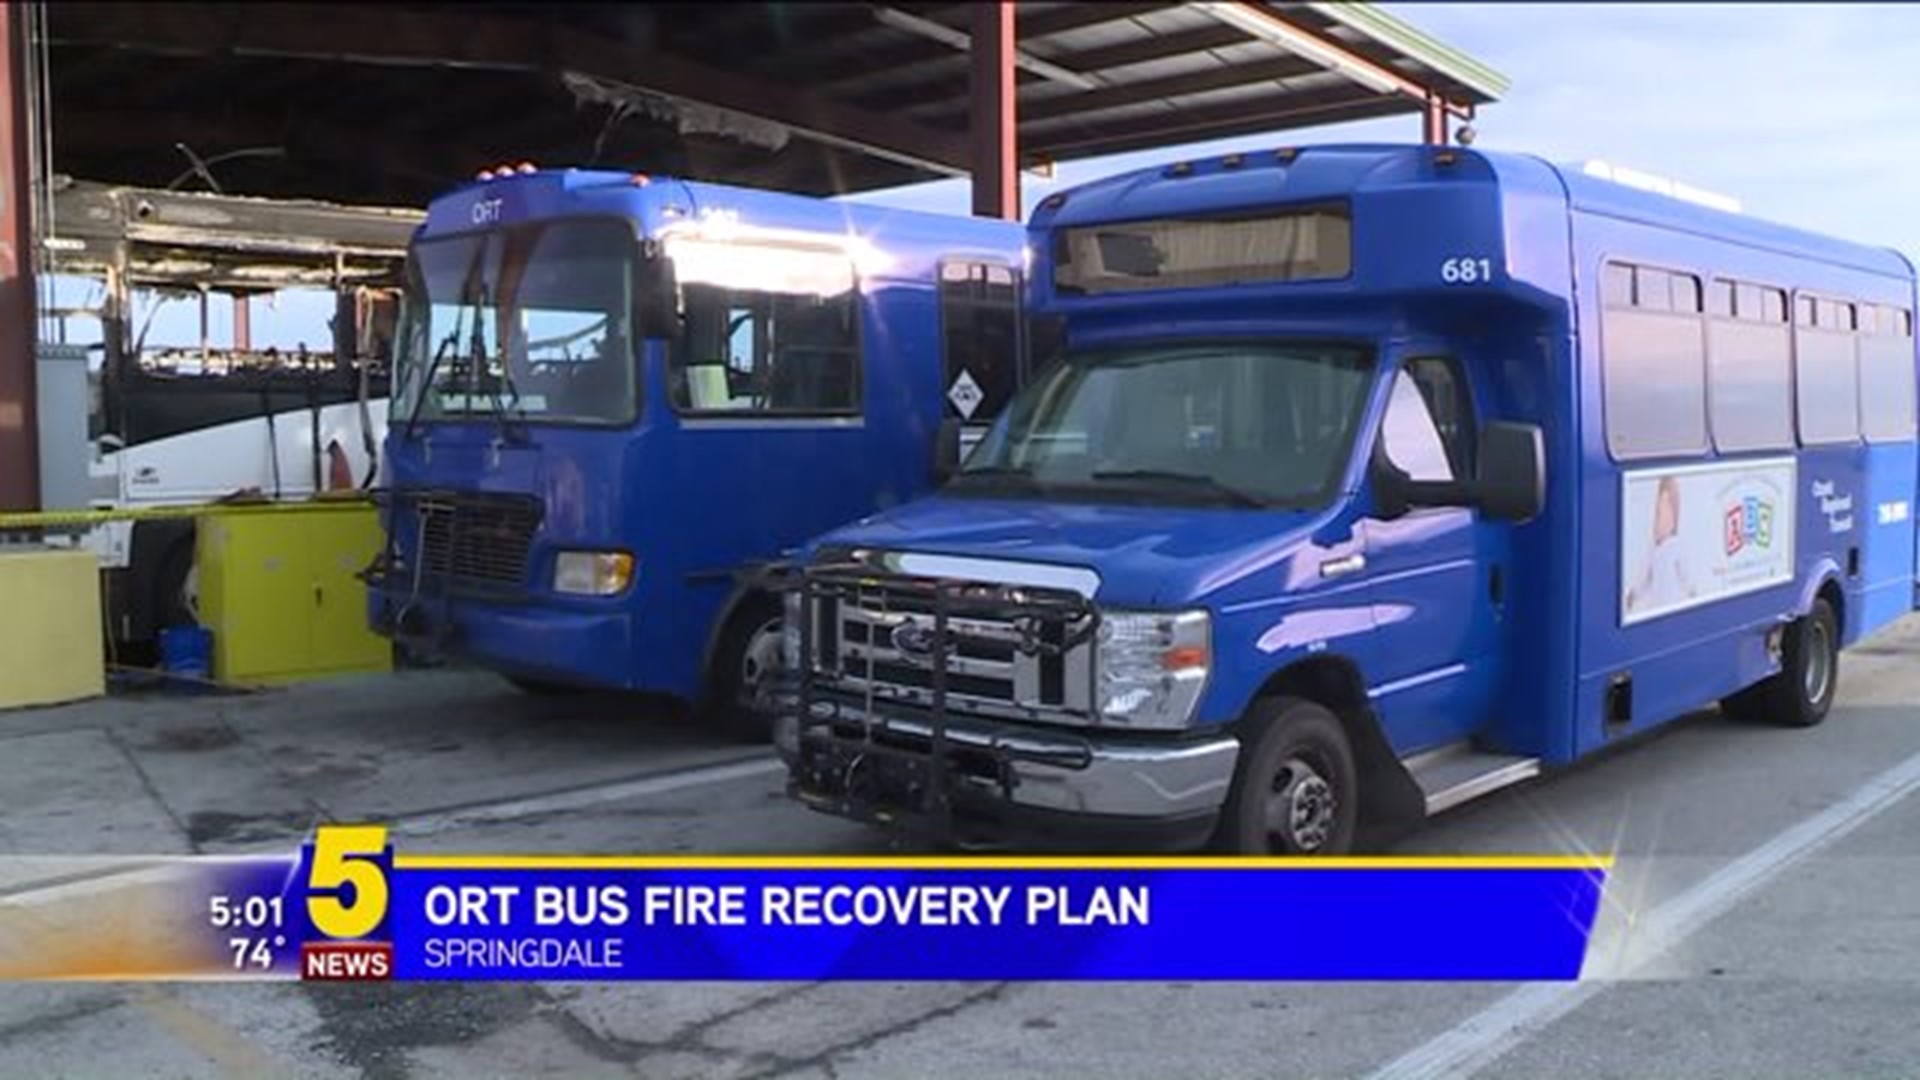 ORT RECOVERY PLAN FOLLOWING FIRE